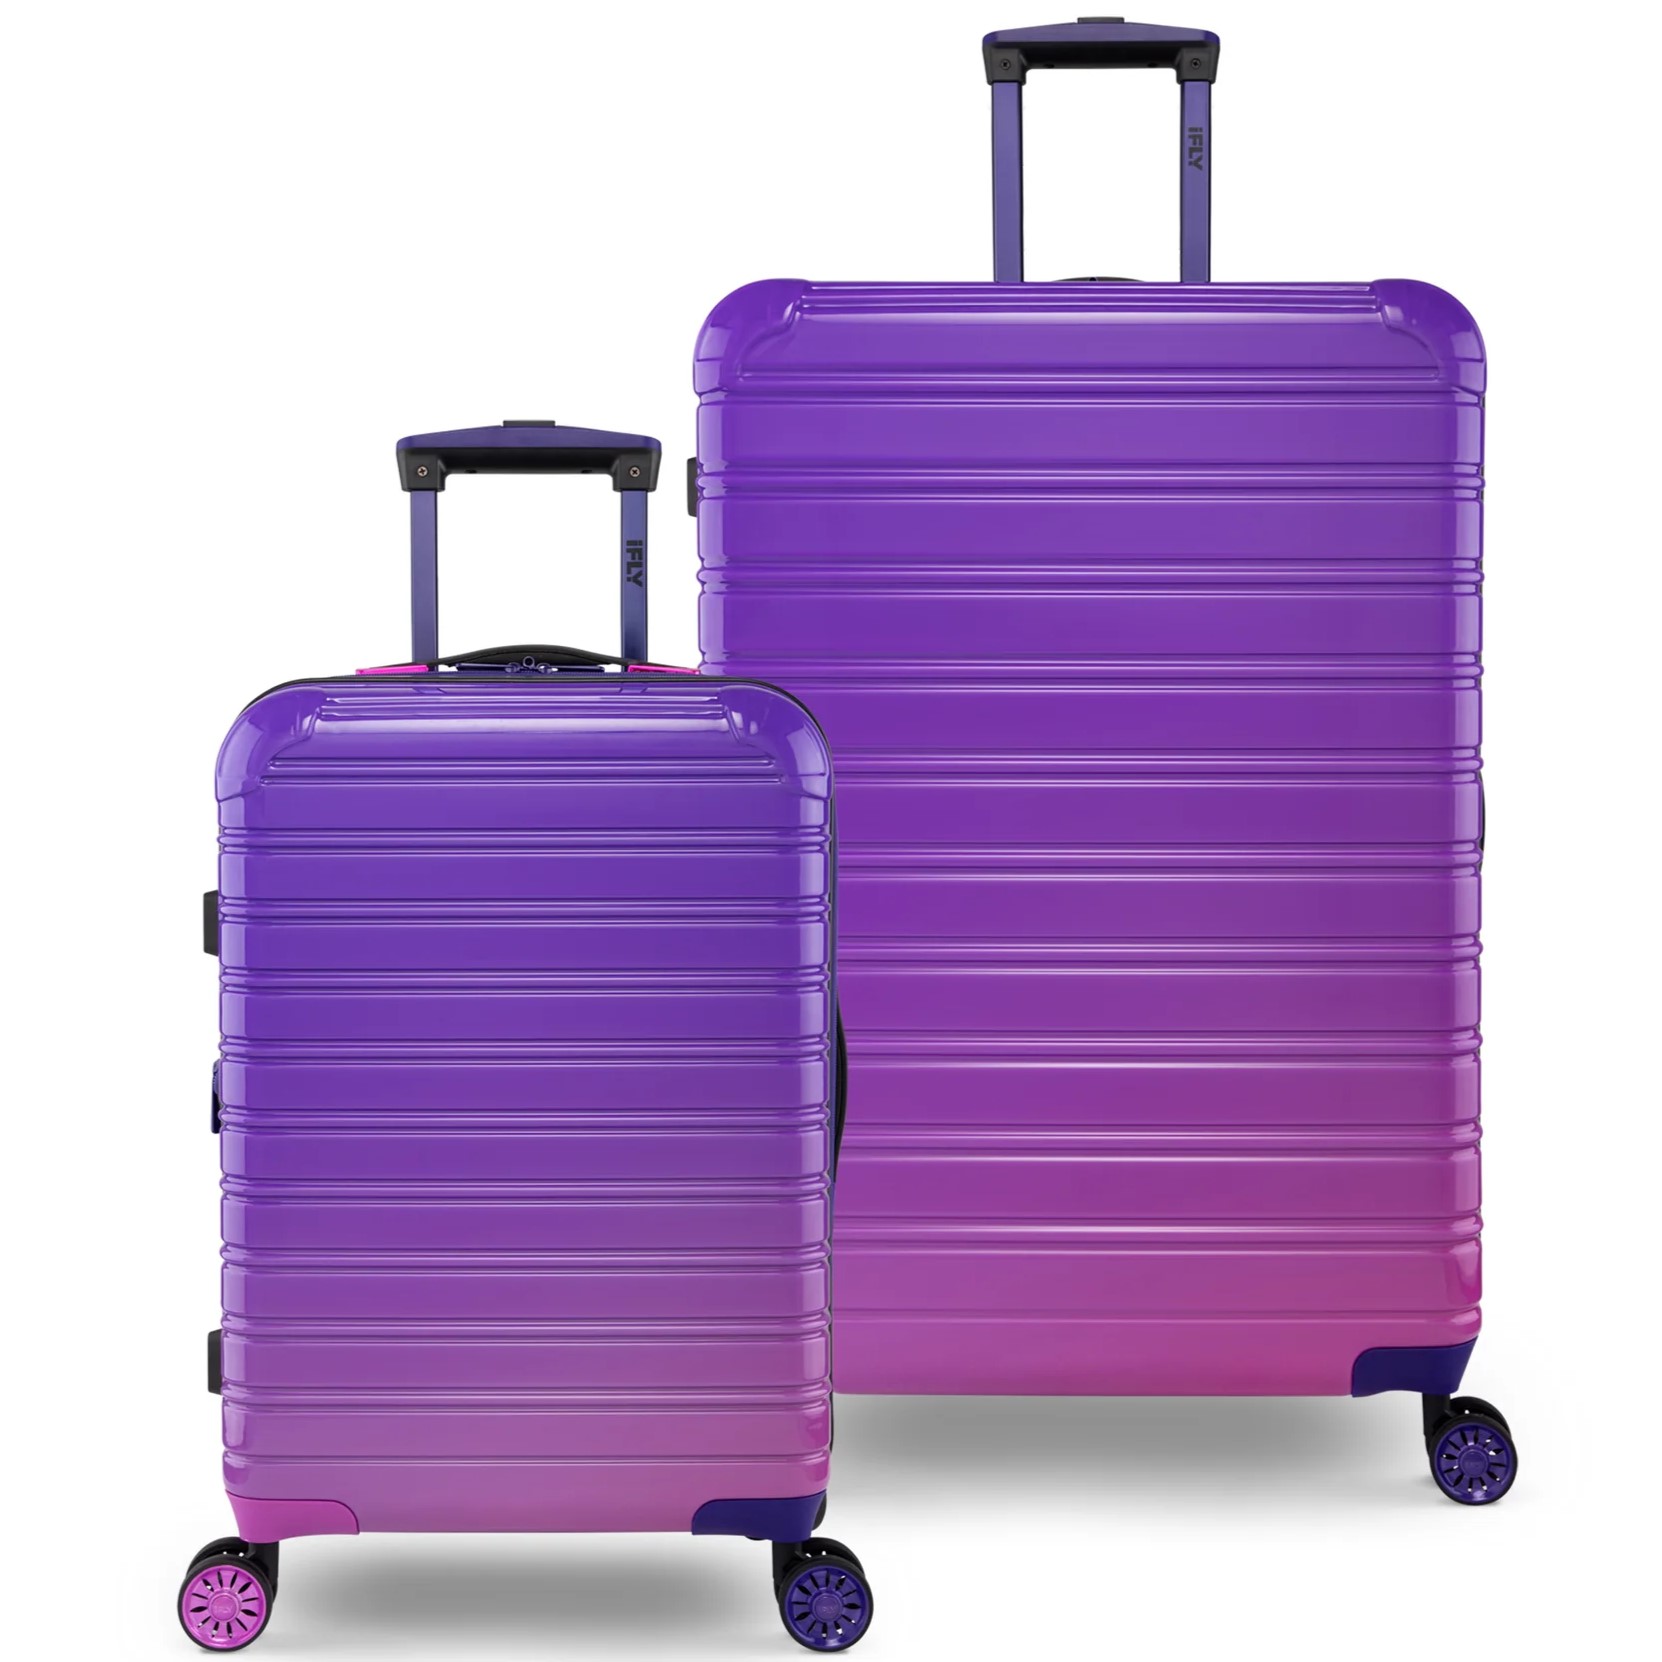 VALI MÀU TÍM LOANG DU LỊCH IFLY FIBERTECH OMBRE HARDSIDE LUGGAGE IN MIDNIGHT BERRY 13